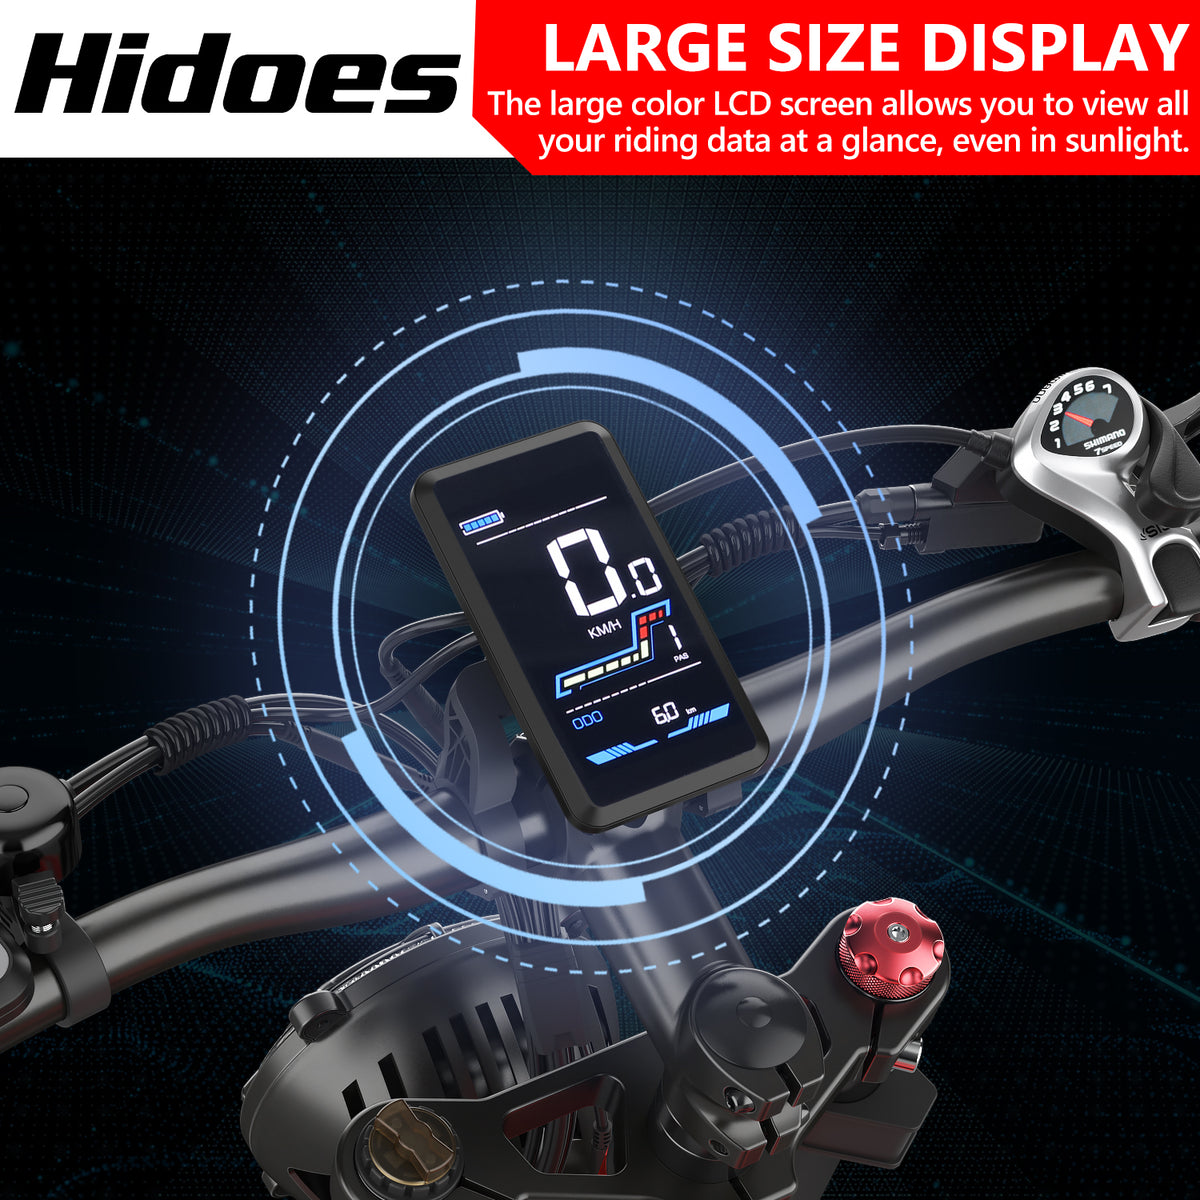 Hidoes B6 fat tire electric bike with large LCD Display